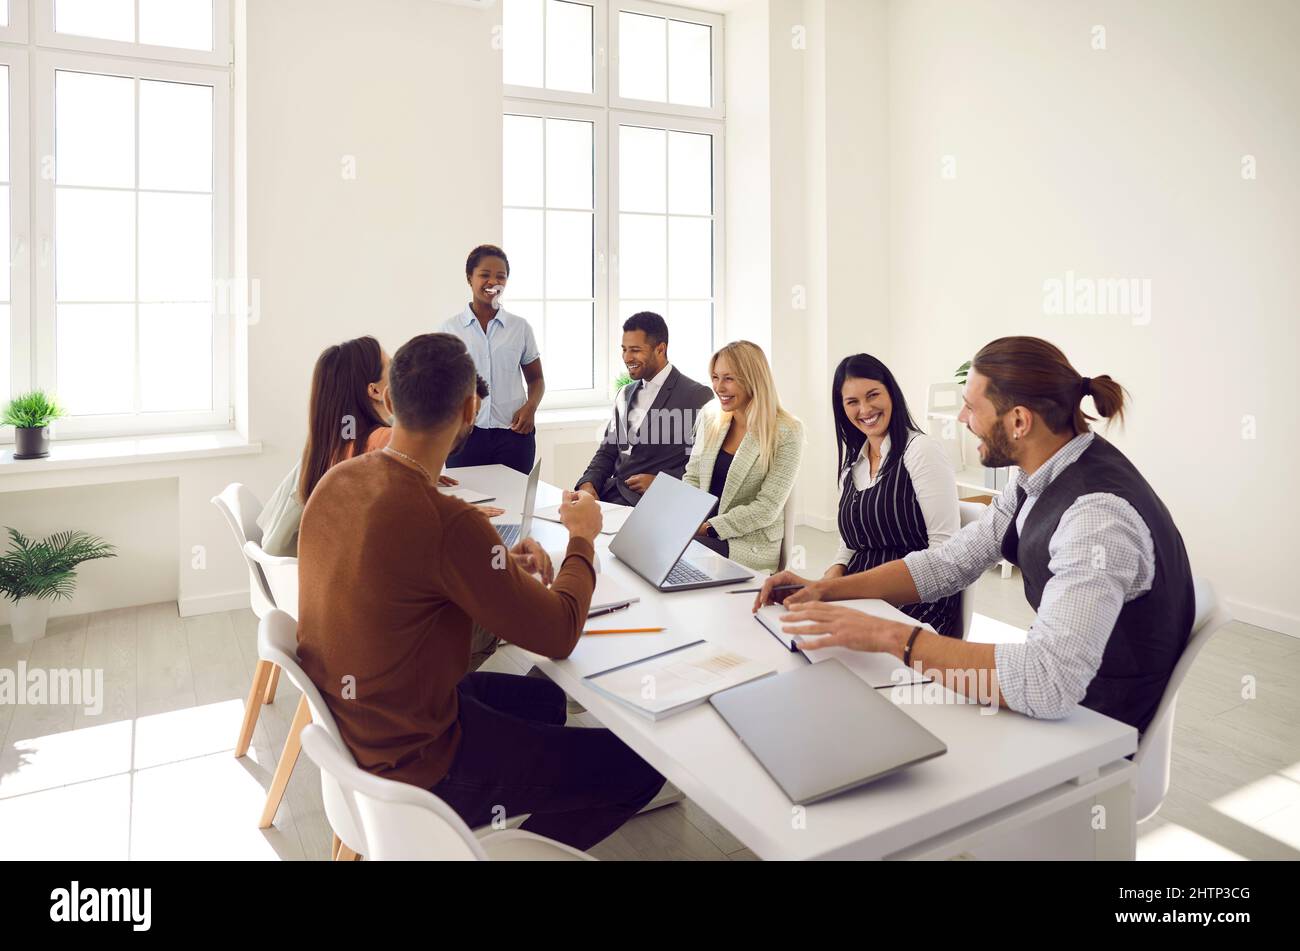 Diverse team of happy business people laughing at something during a work meeting Stock Photo